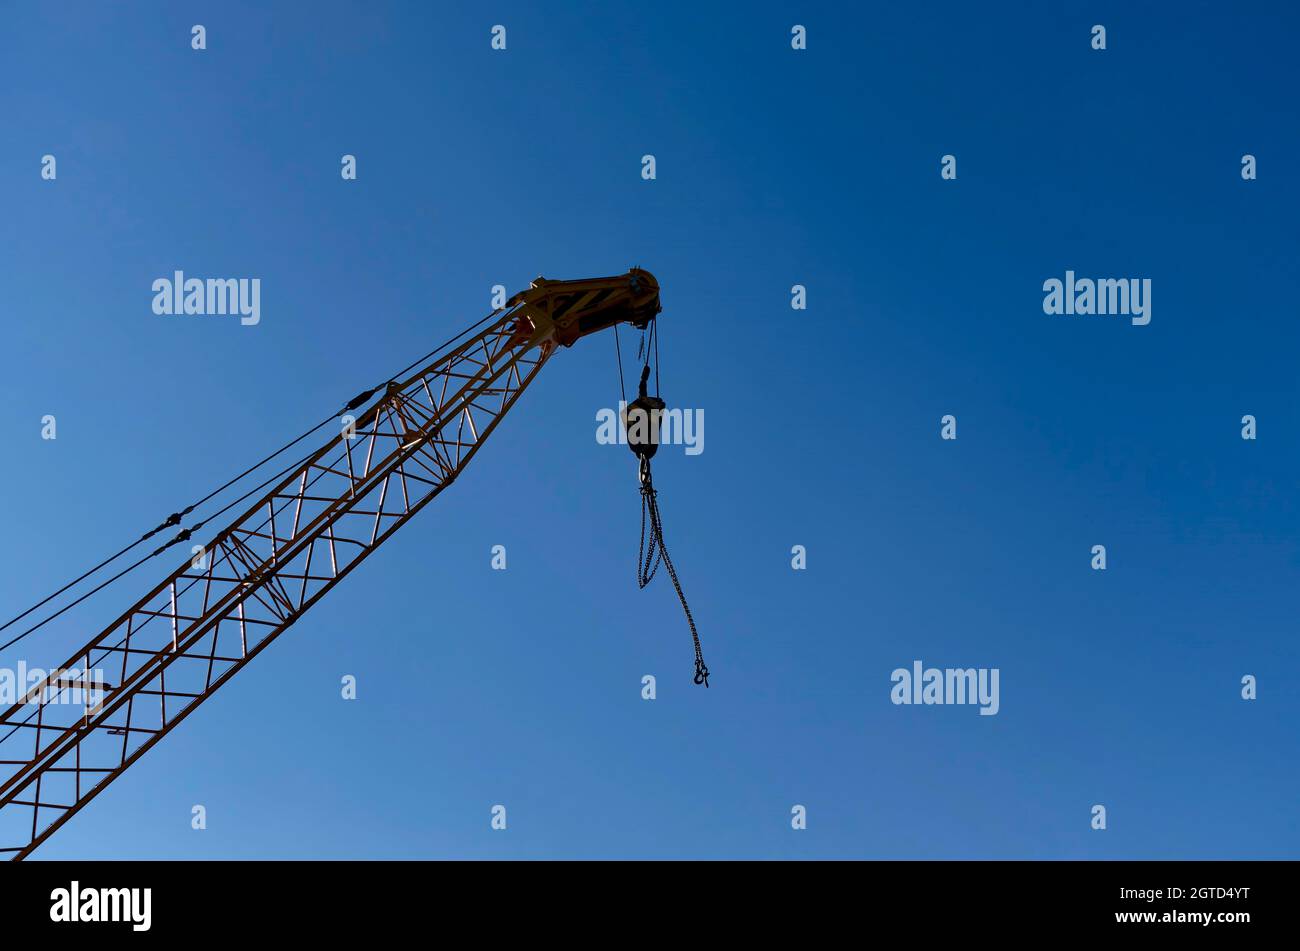 Part of the construction of a crane with a hook for lifting weights against a blue sky, suitable for placing text or image, Sofia, Bulgaria Stock Photo